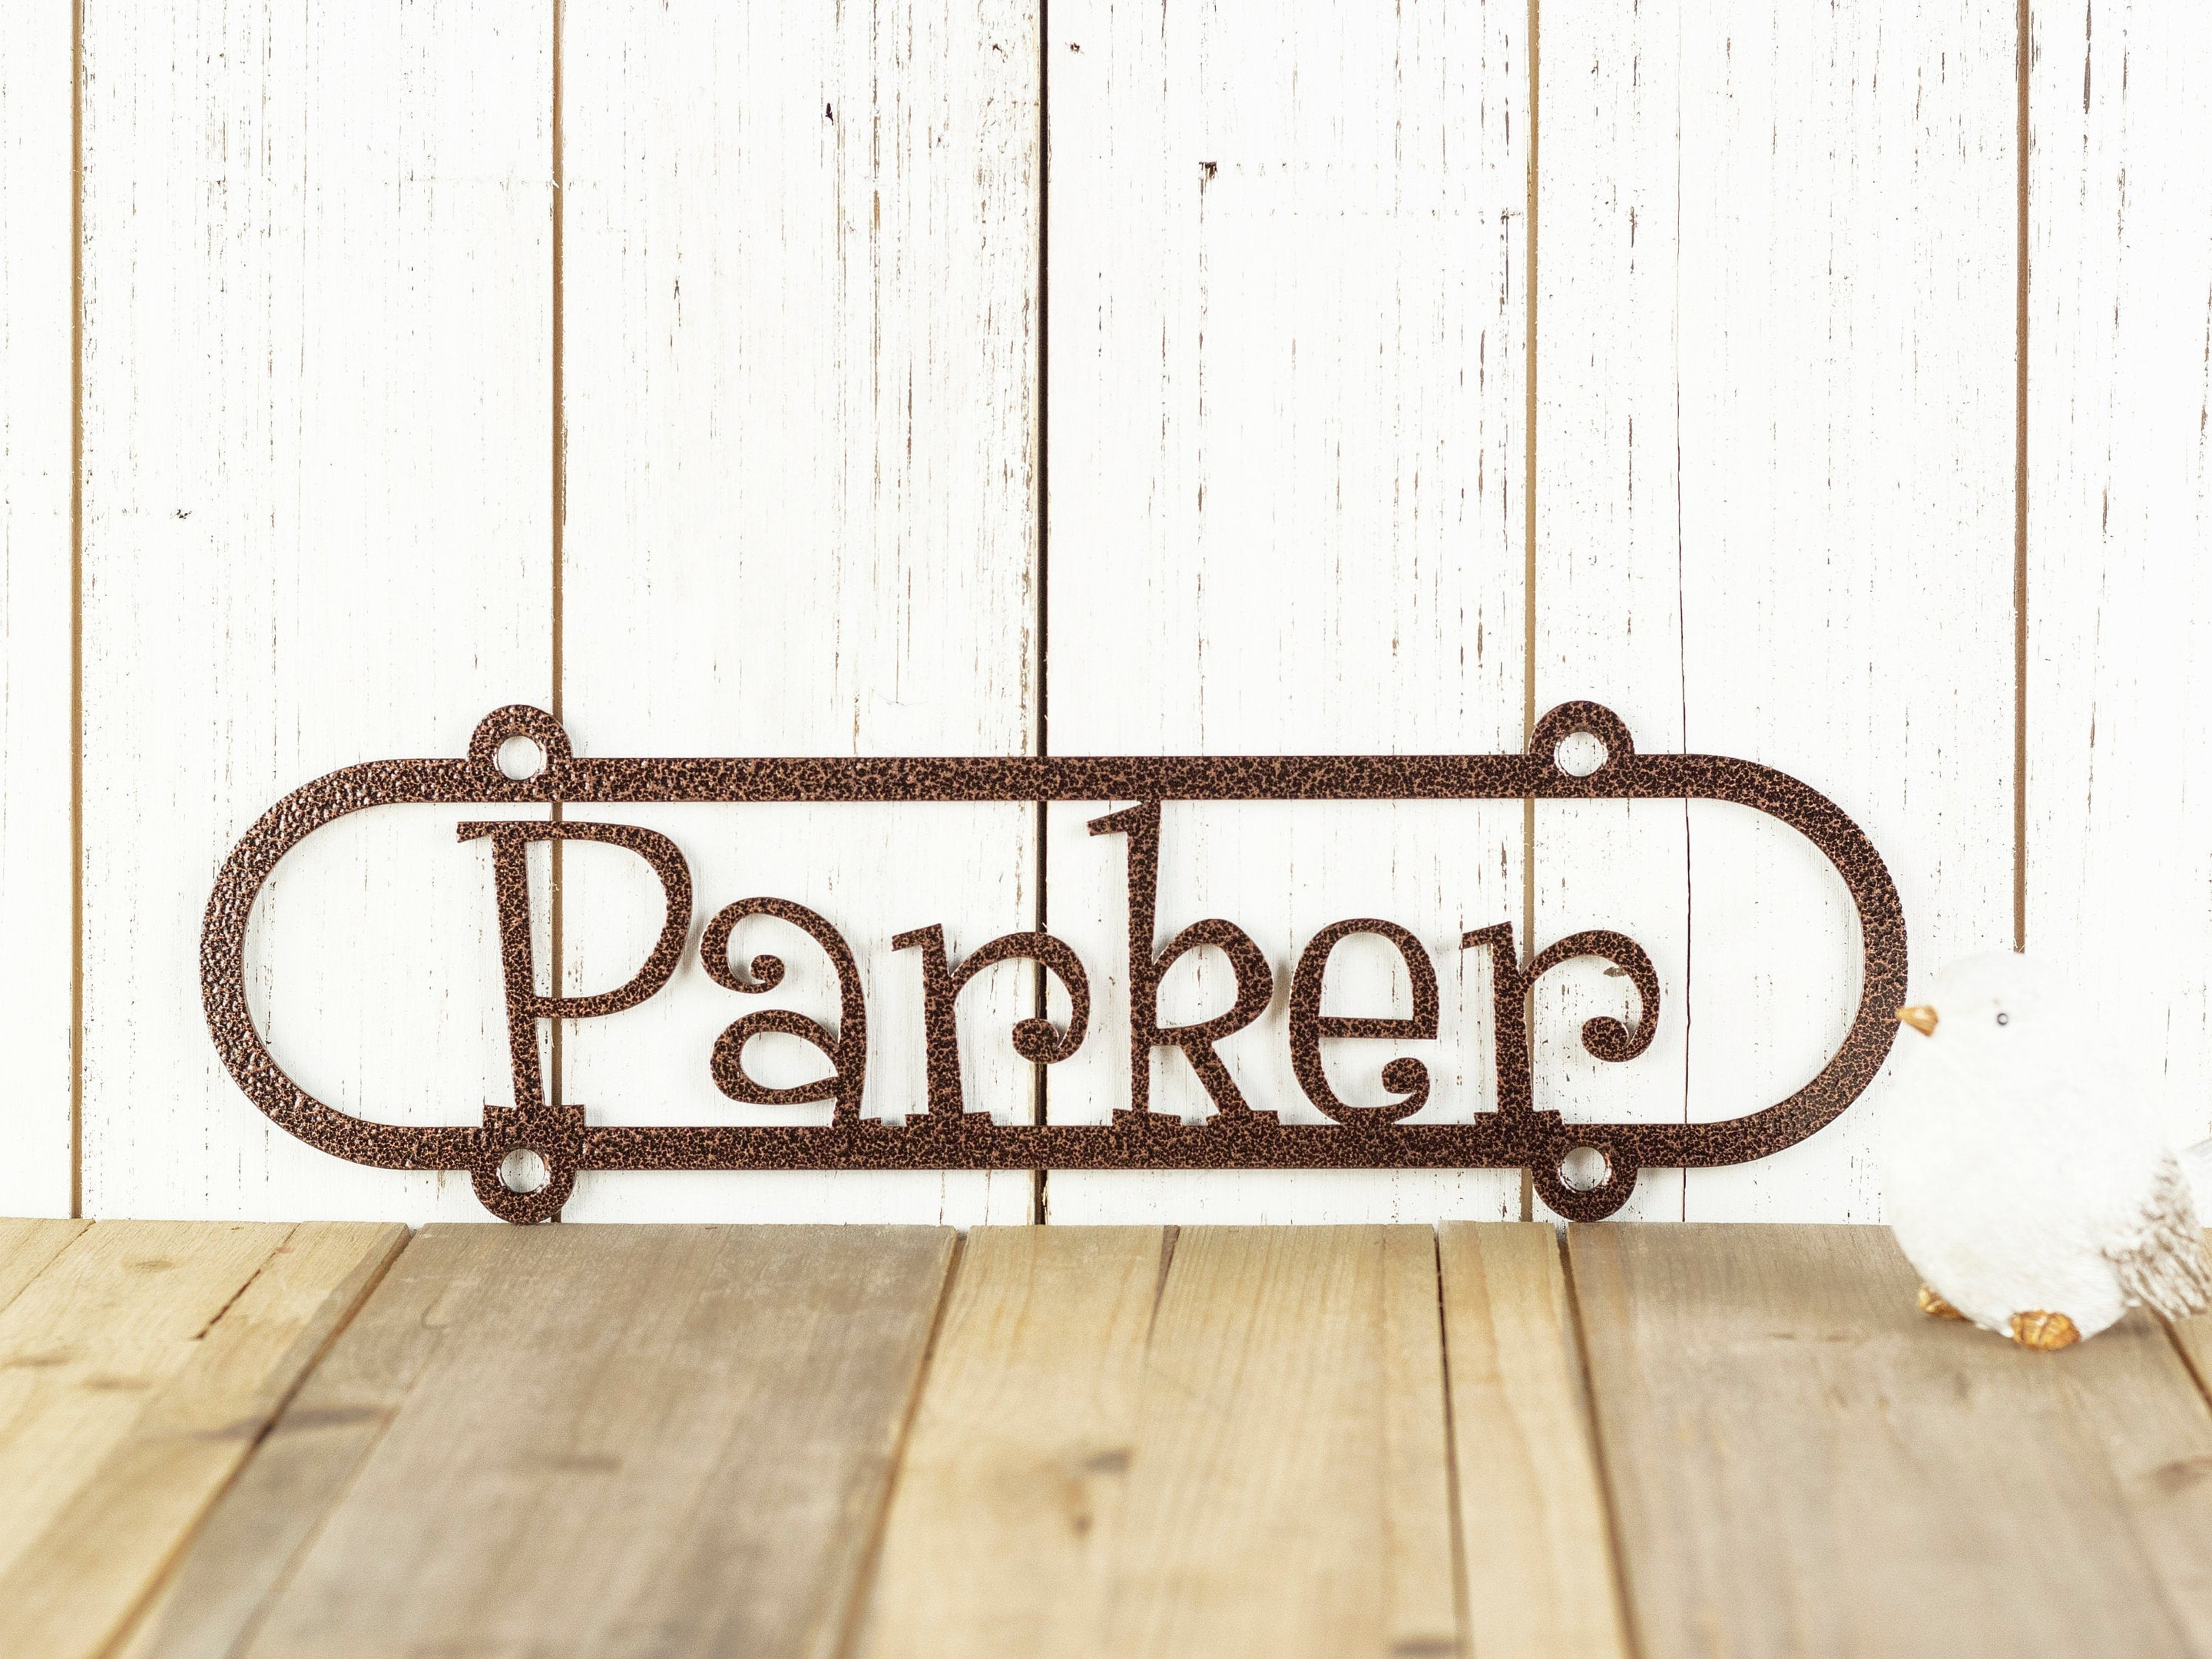 Custom Metal Name Sign, Personalized Name Plaque, Outdoor Metal Wall Art, Laser Cut Metal Signs Custom Gift Ideas 12x12IN